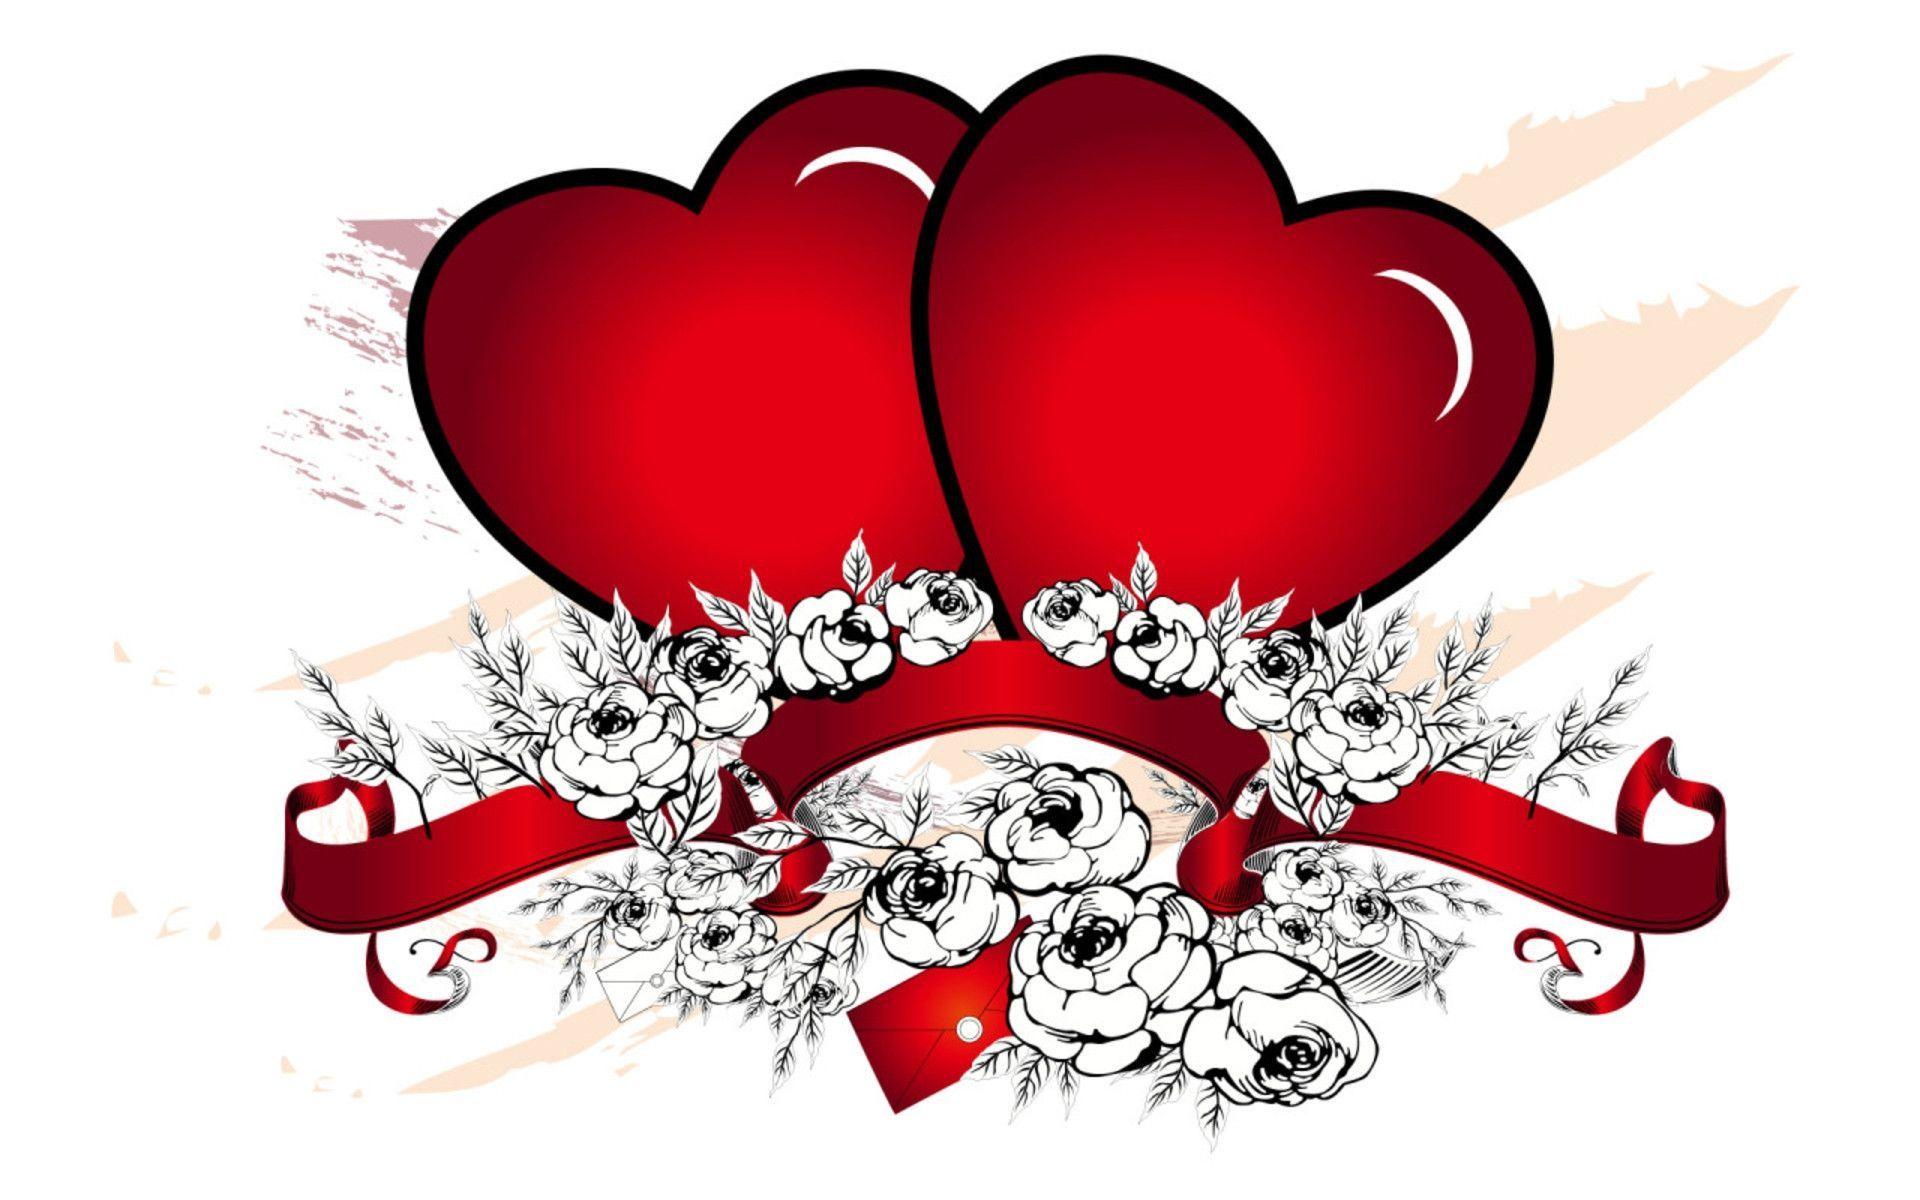 red roses love heart wallpaper Search Engine